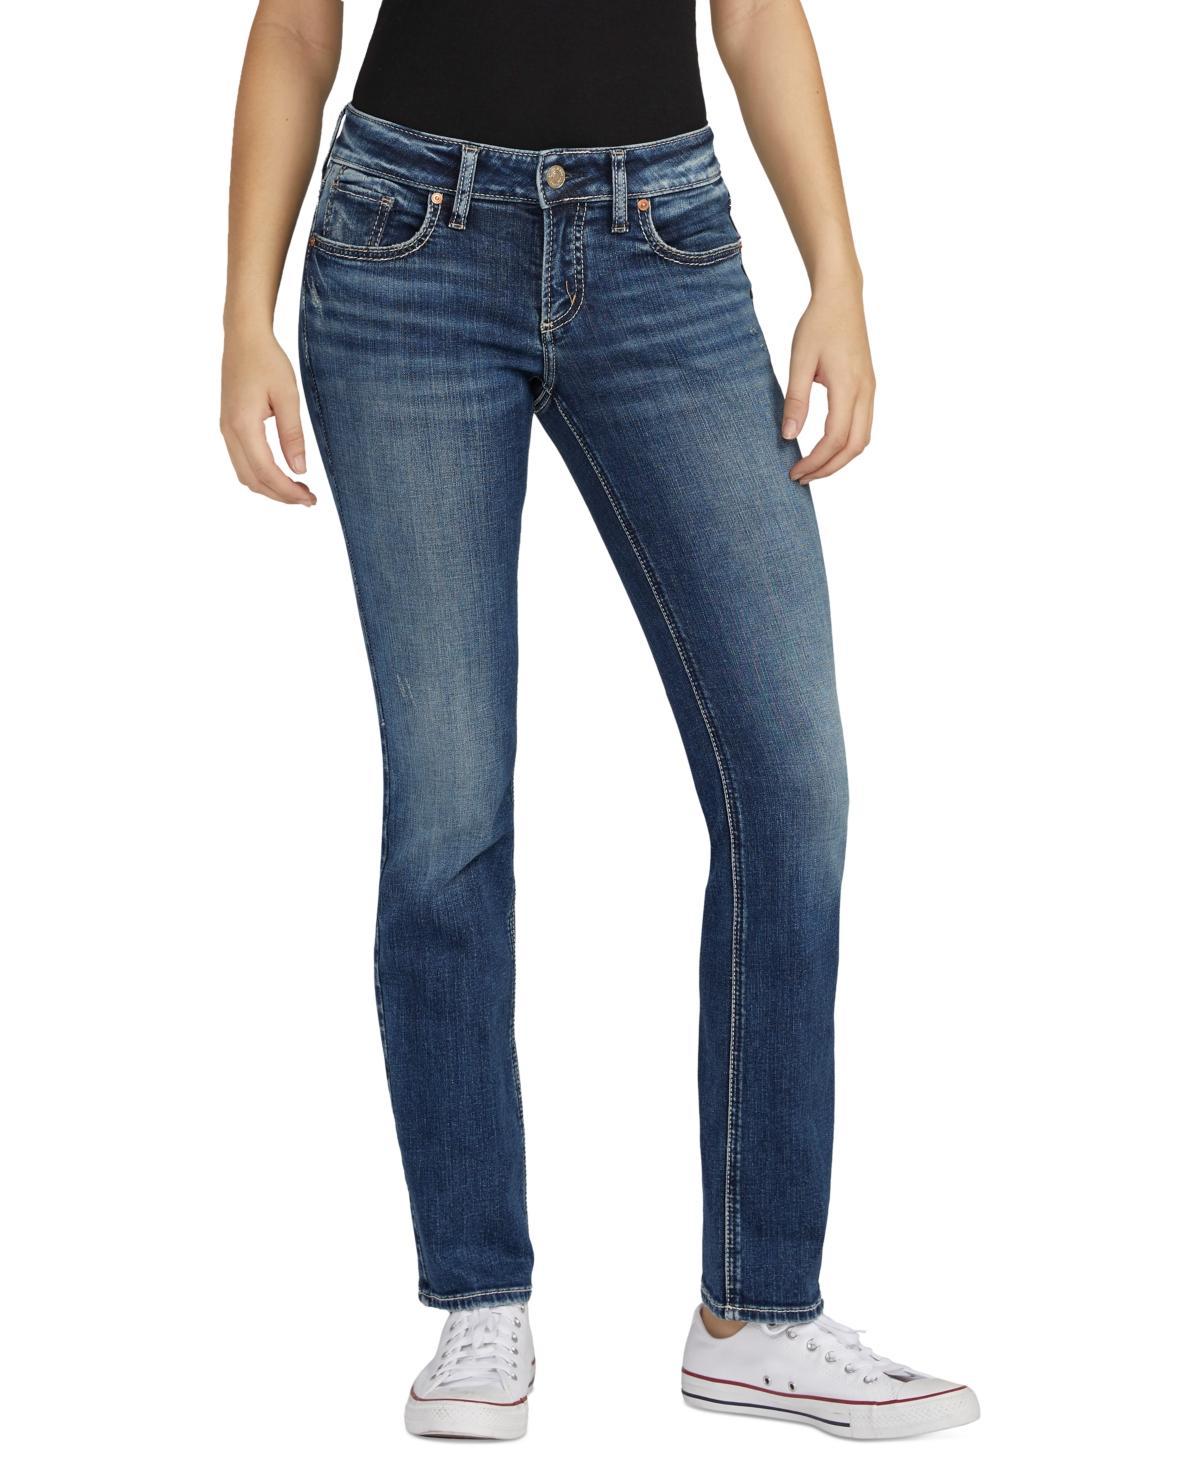 Silver Jeans Co. Tuesday Low Rise Slim Bootcut Jeans Product Image